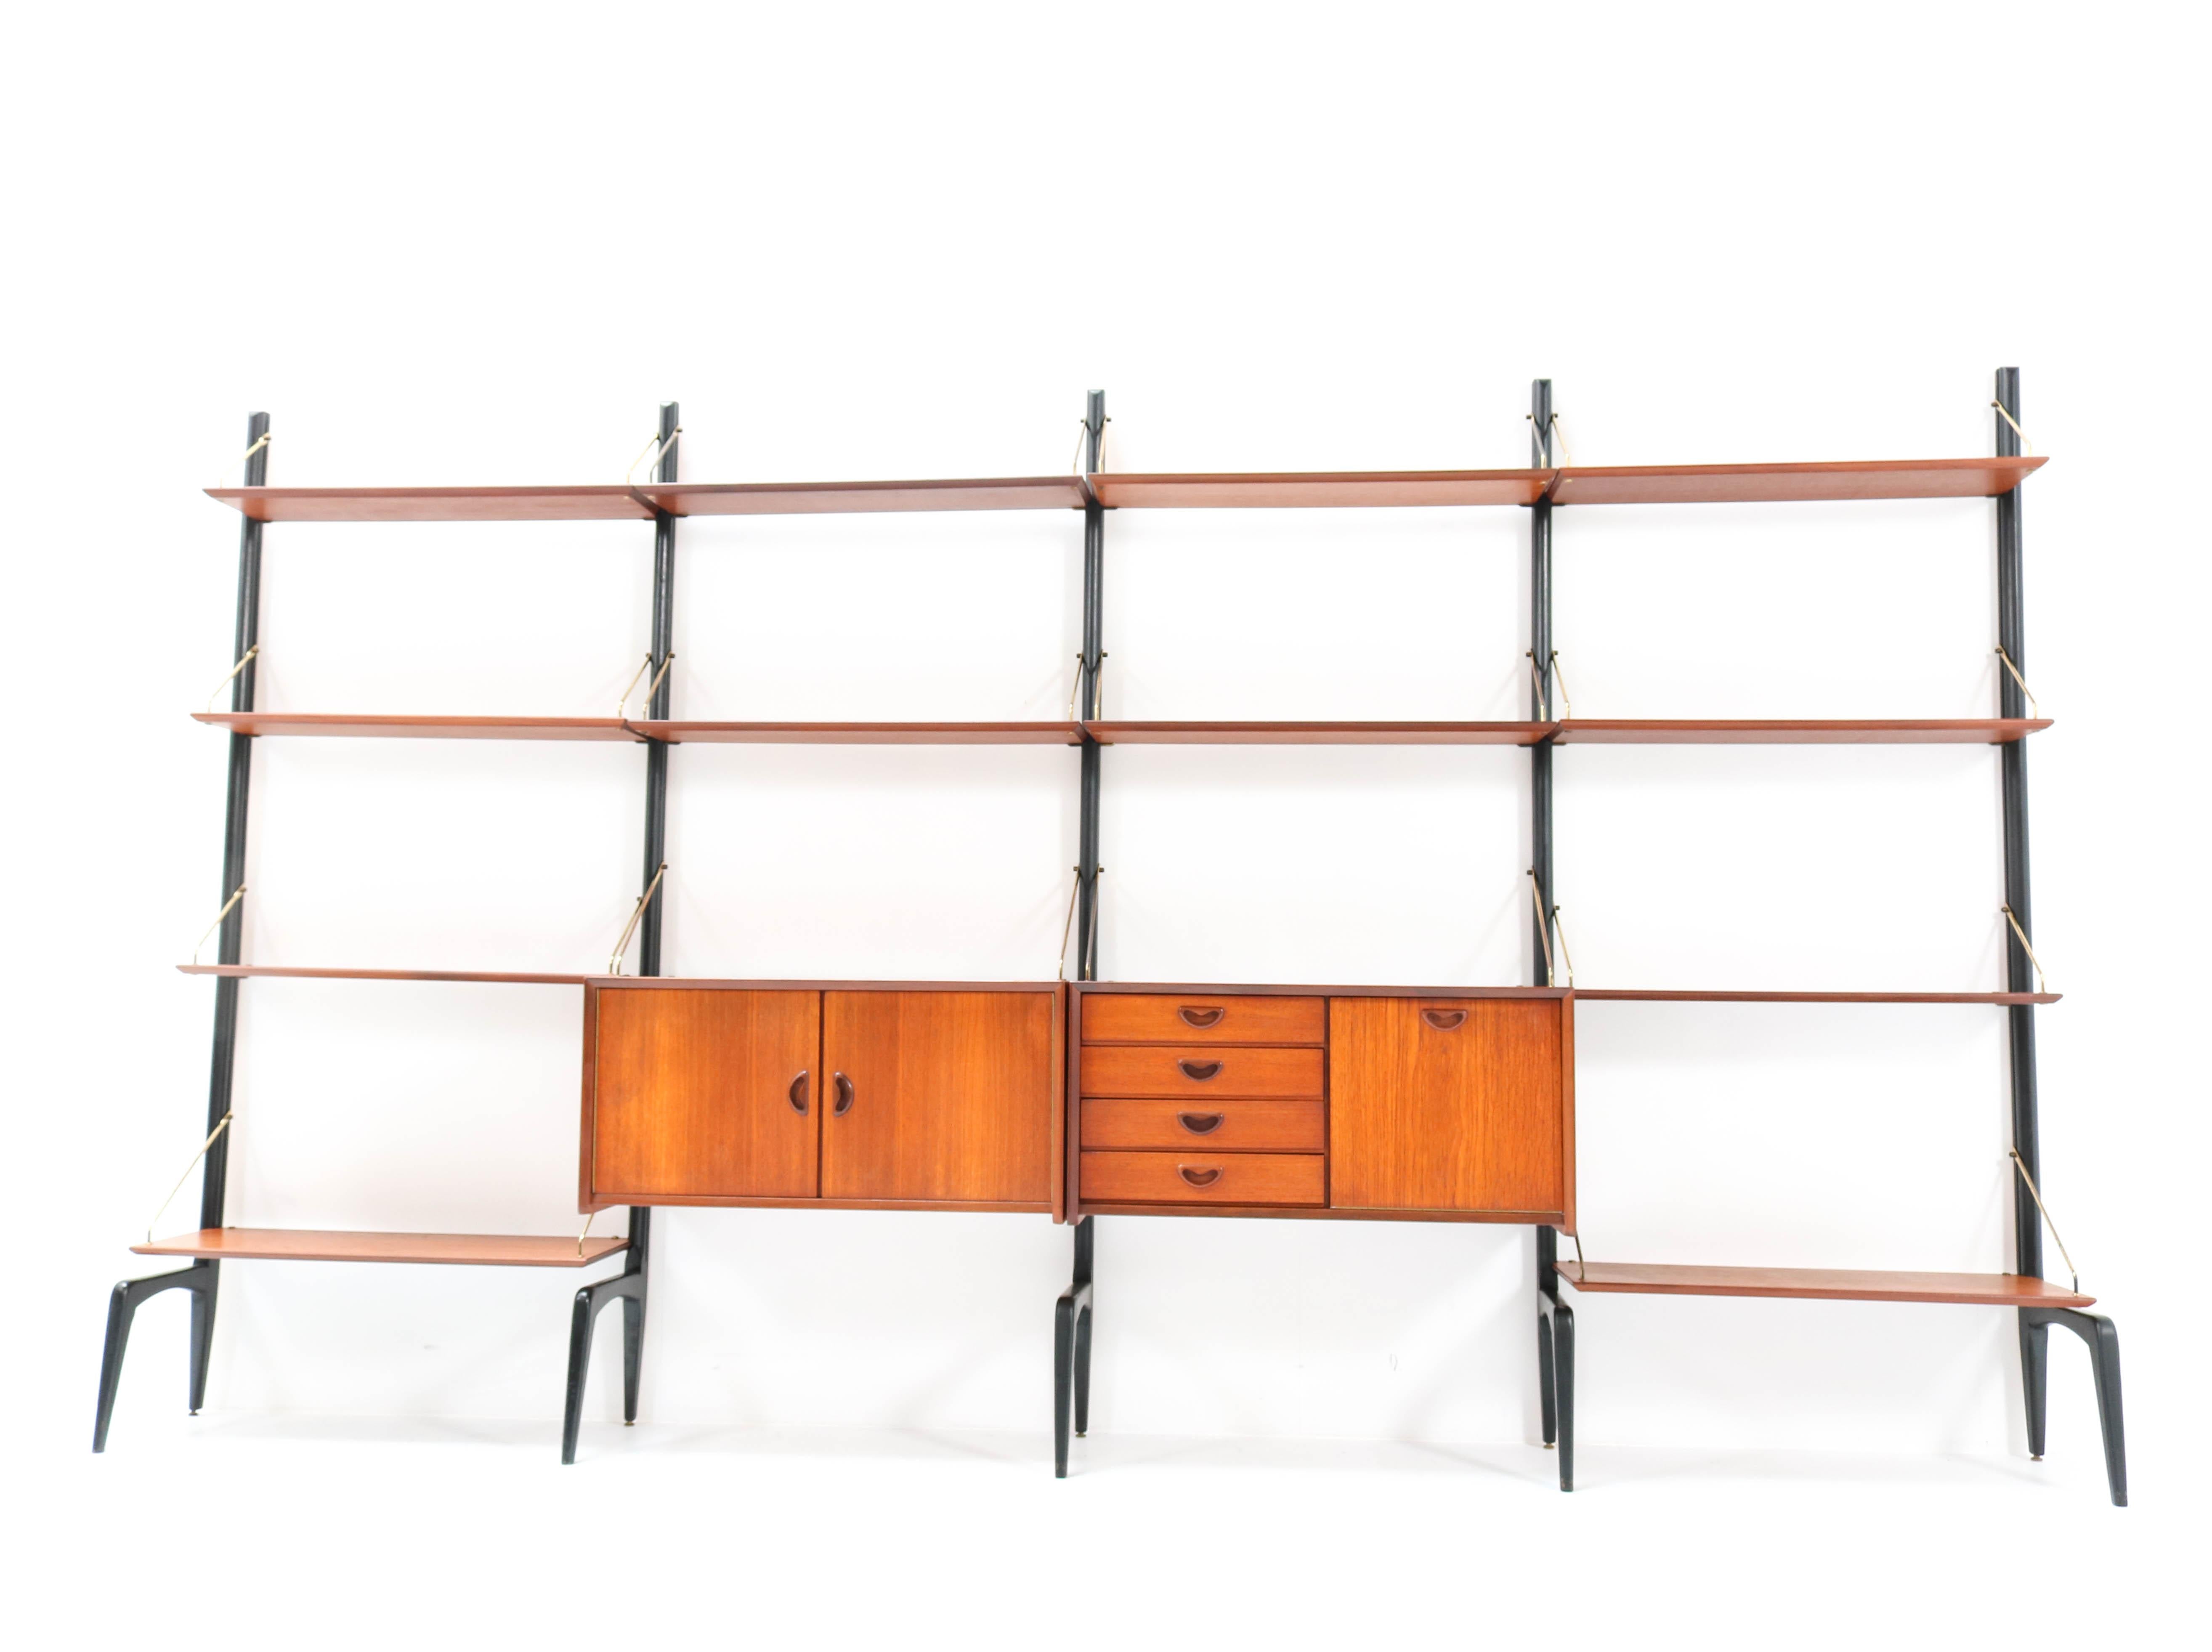 Lacquered Large Mid-Century Modern Free Standing Wall Unit by Louis Van Teeffelen for Webe